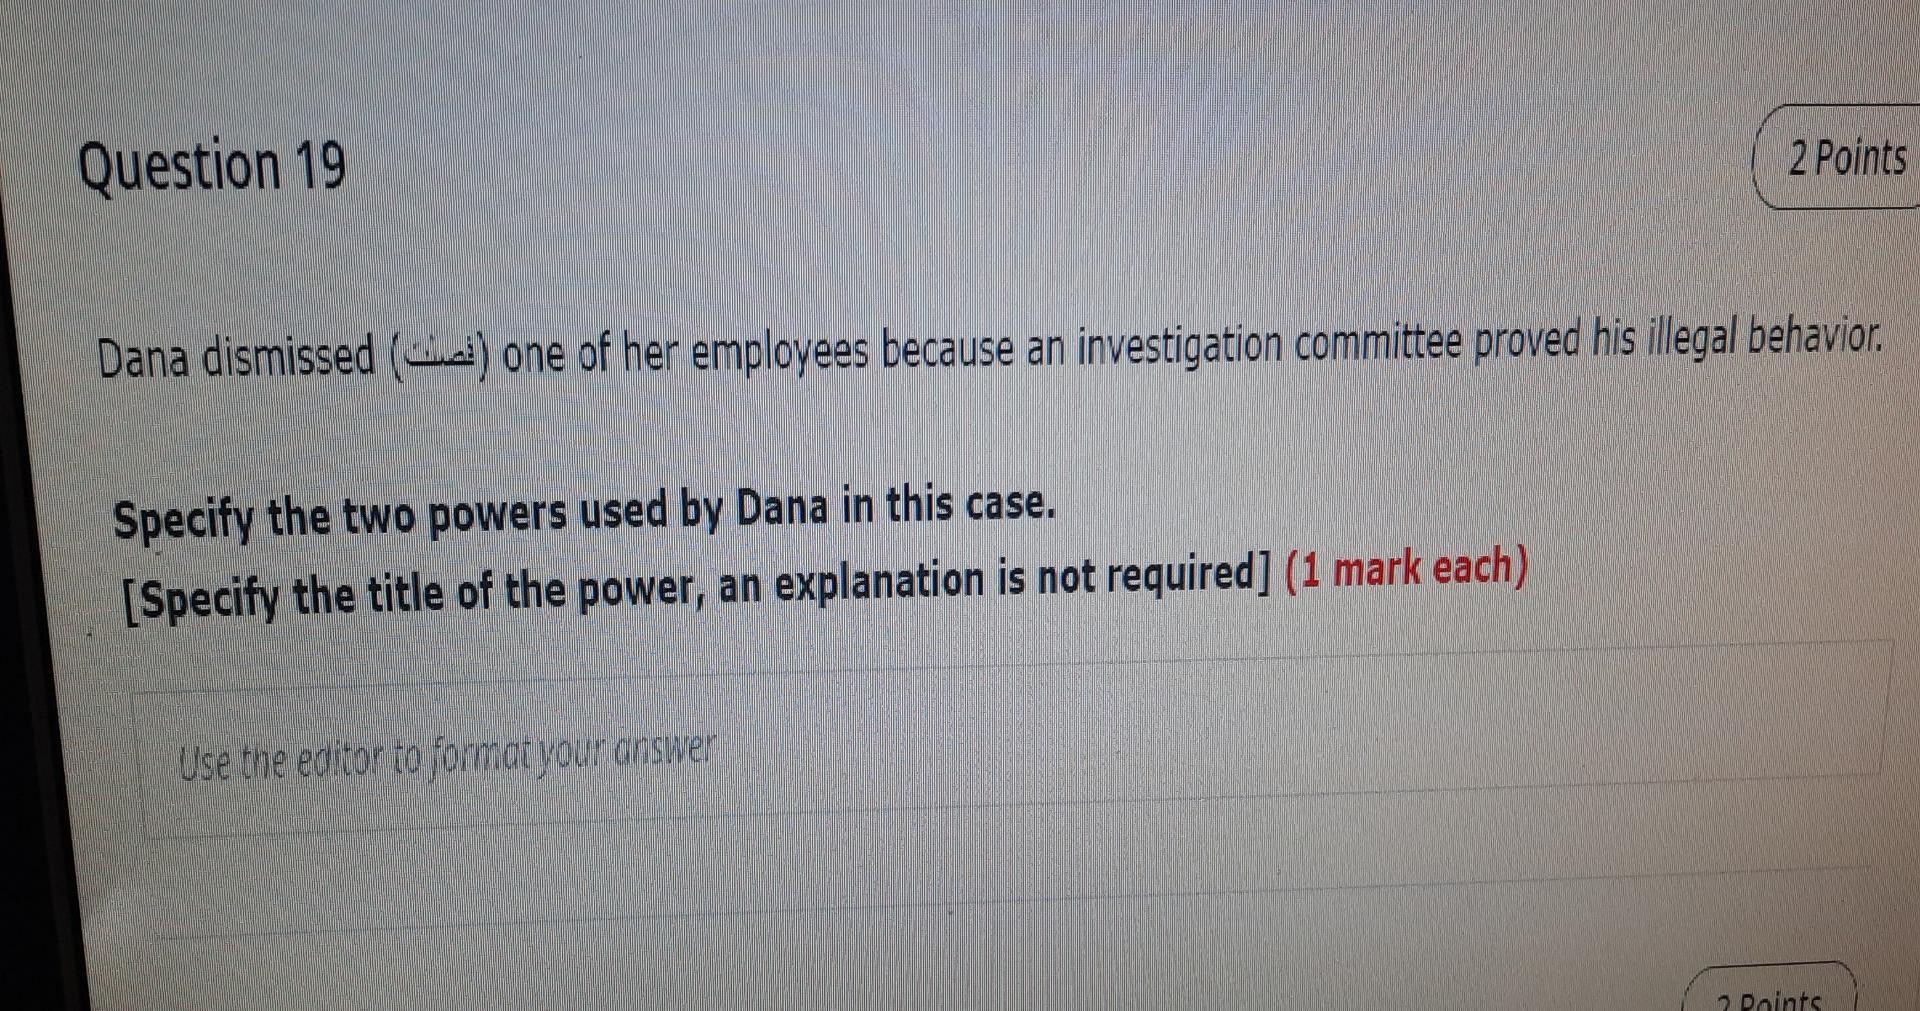 Question 19
2 Points
Dana dismissed (ww.) one of her employees because an investigation committee proved his illegal behavior